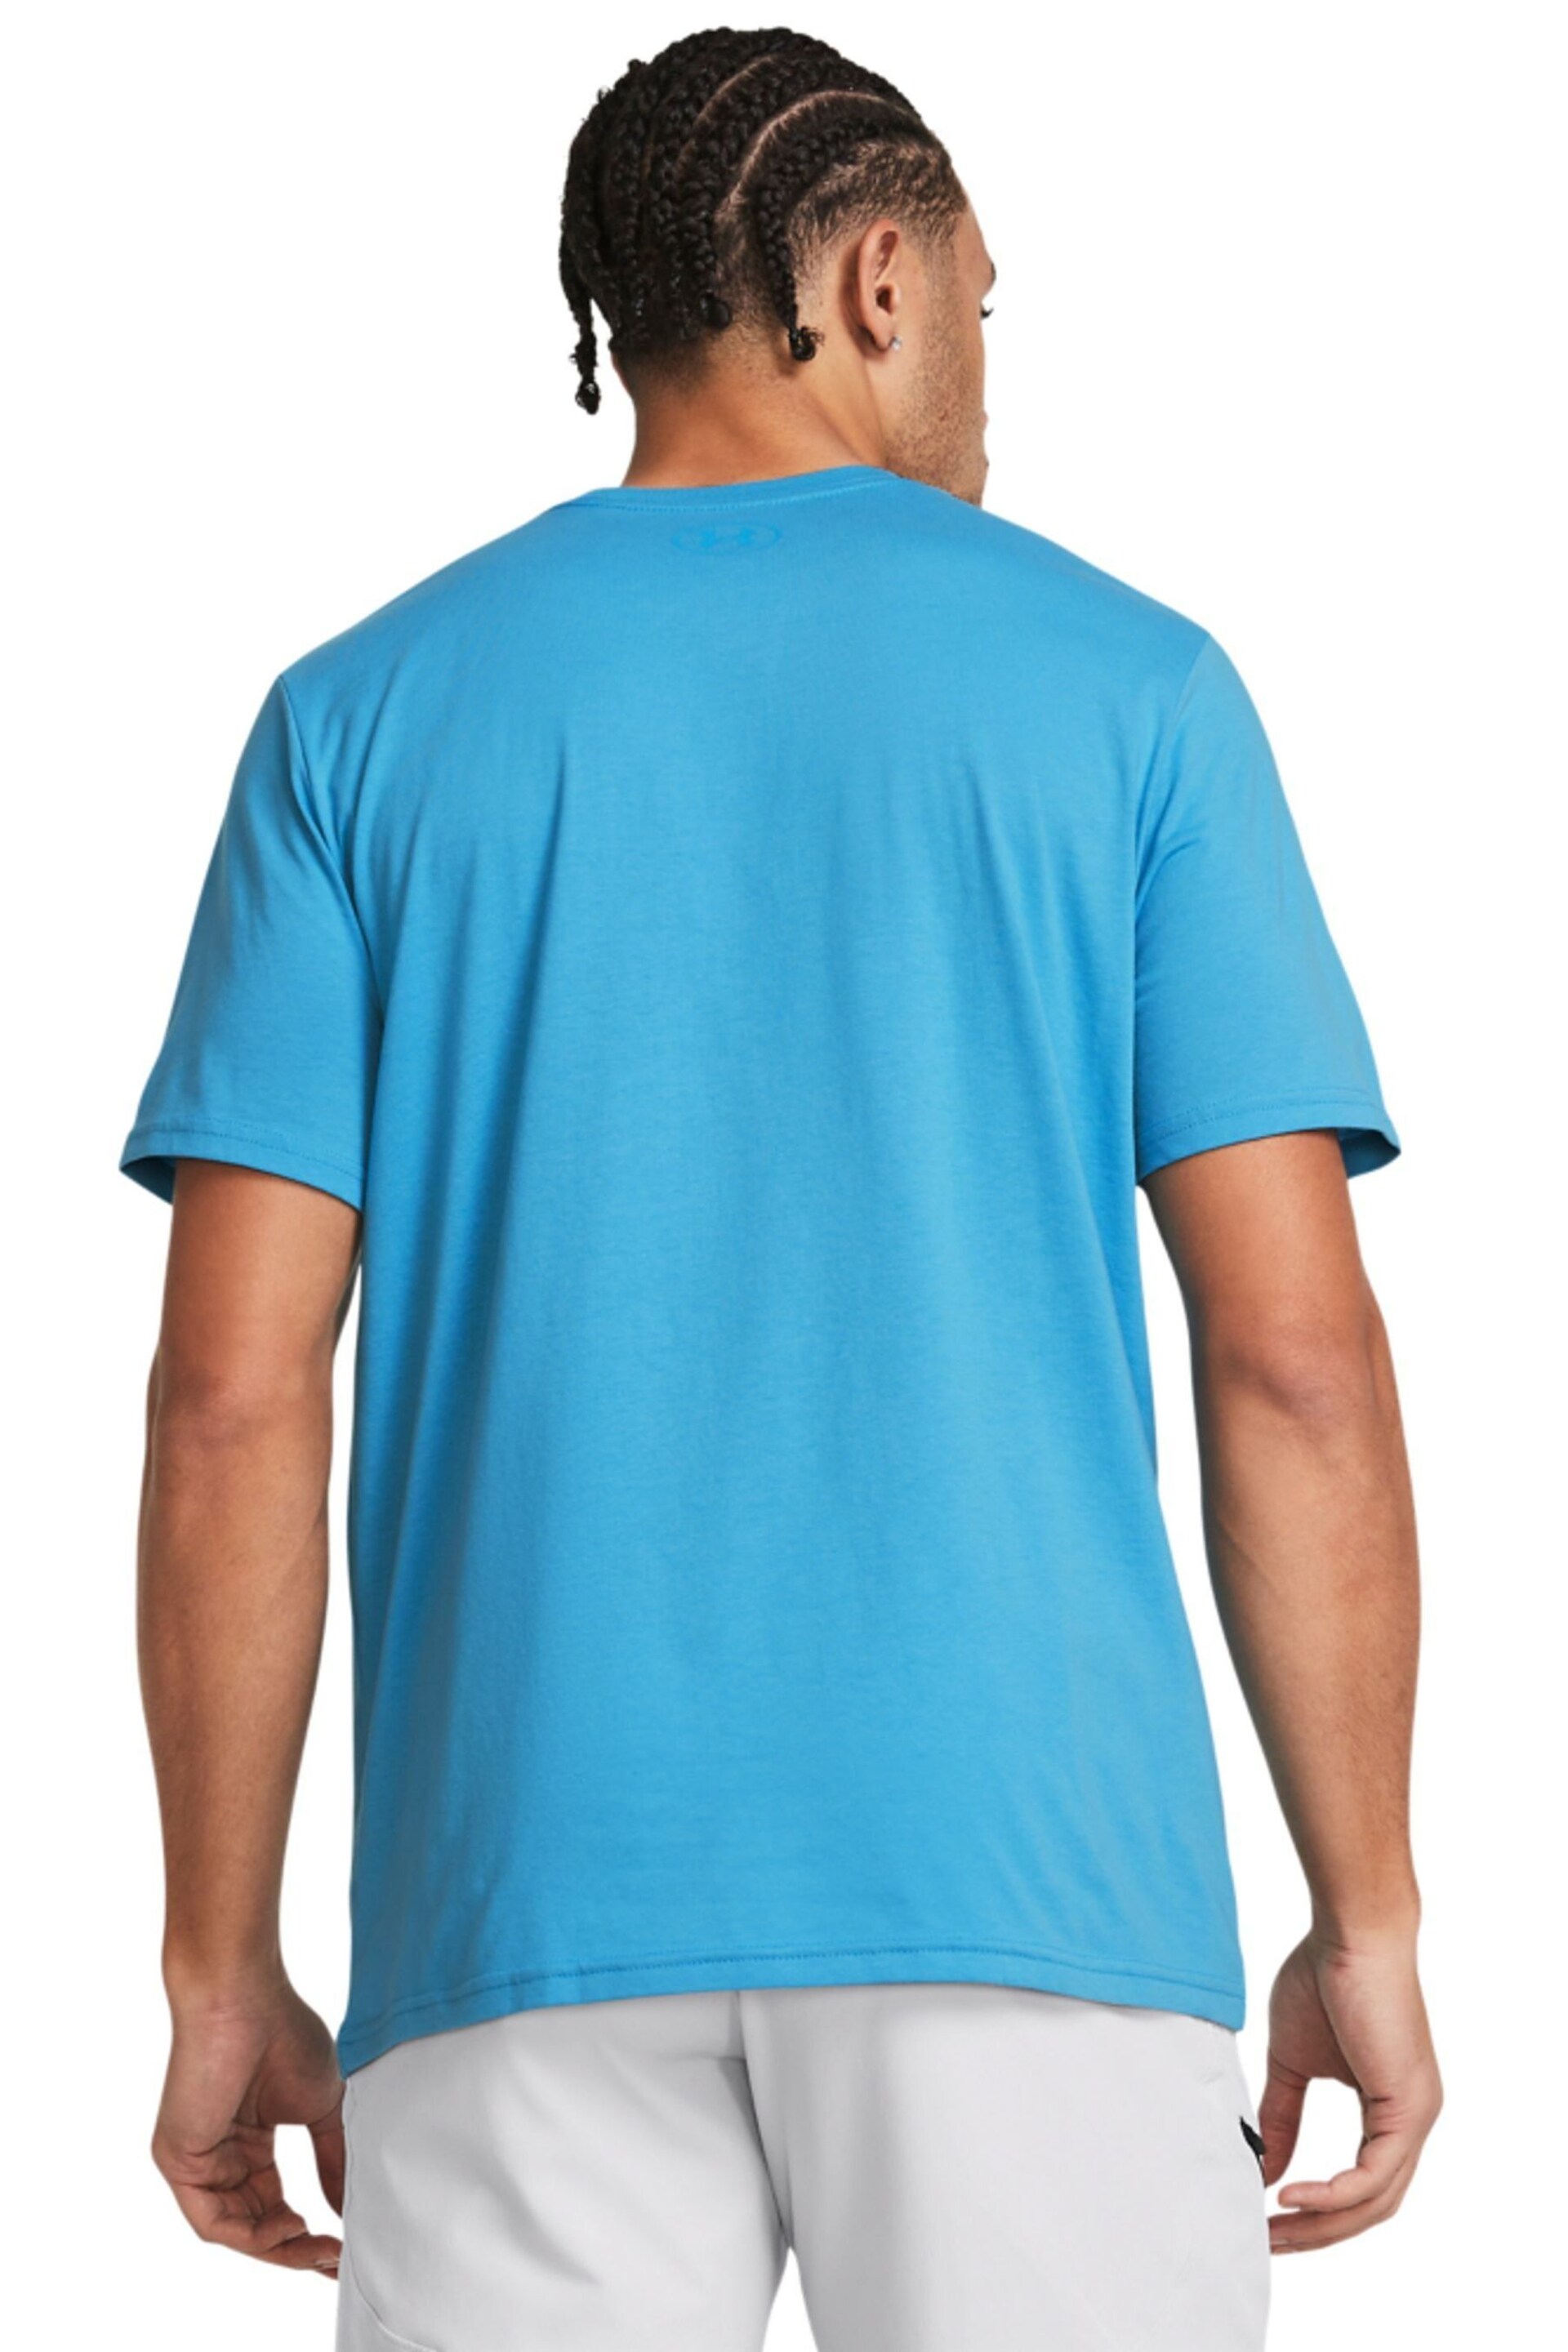 Under Armour Blue Left Chest Short Sleeve T-Shirt - Image 2 of 4